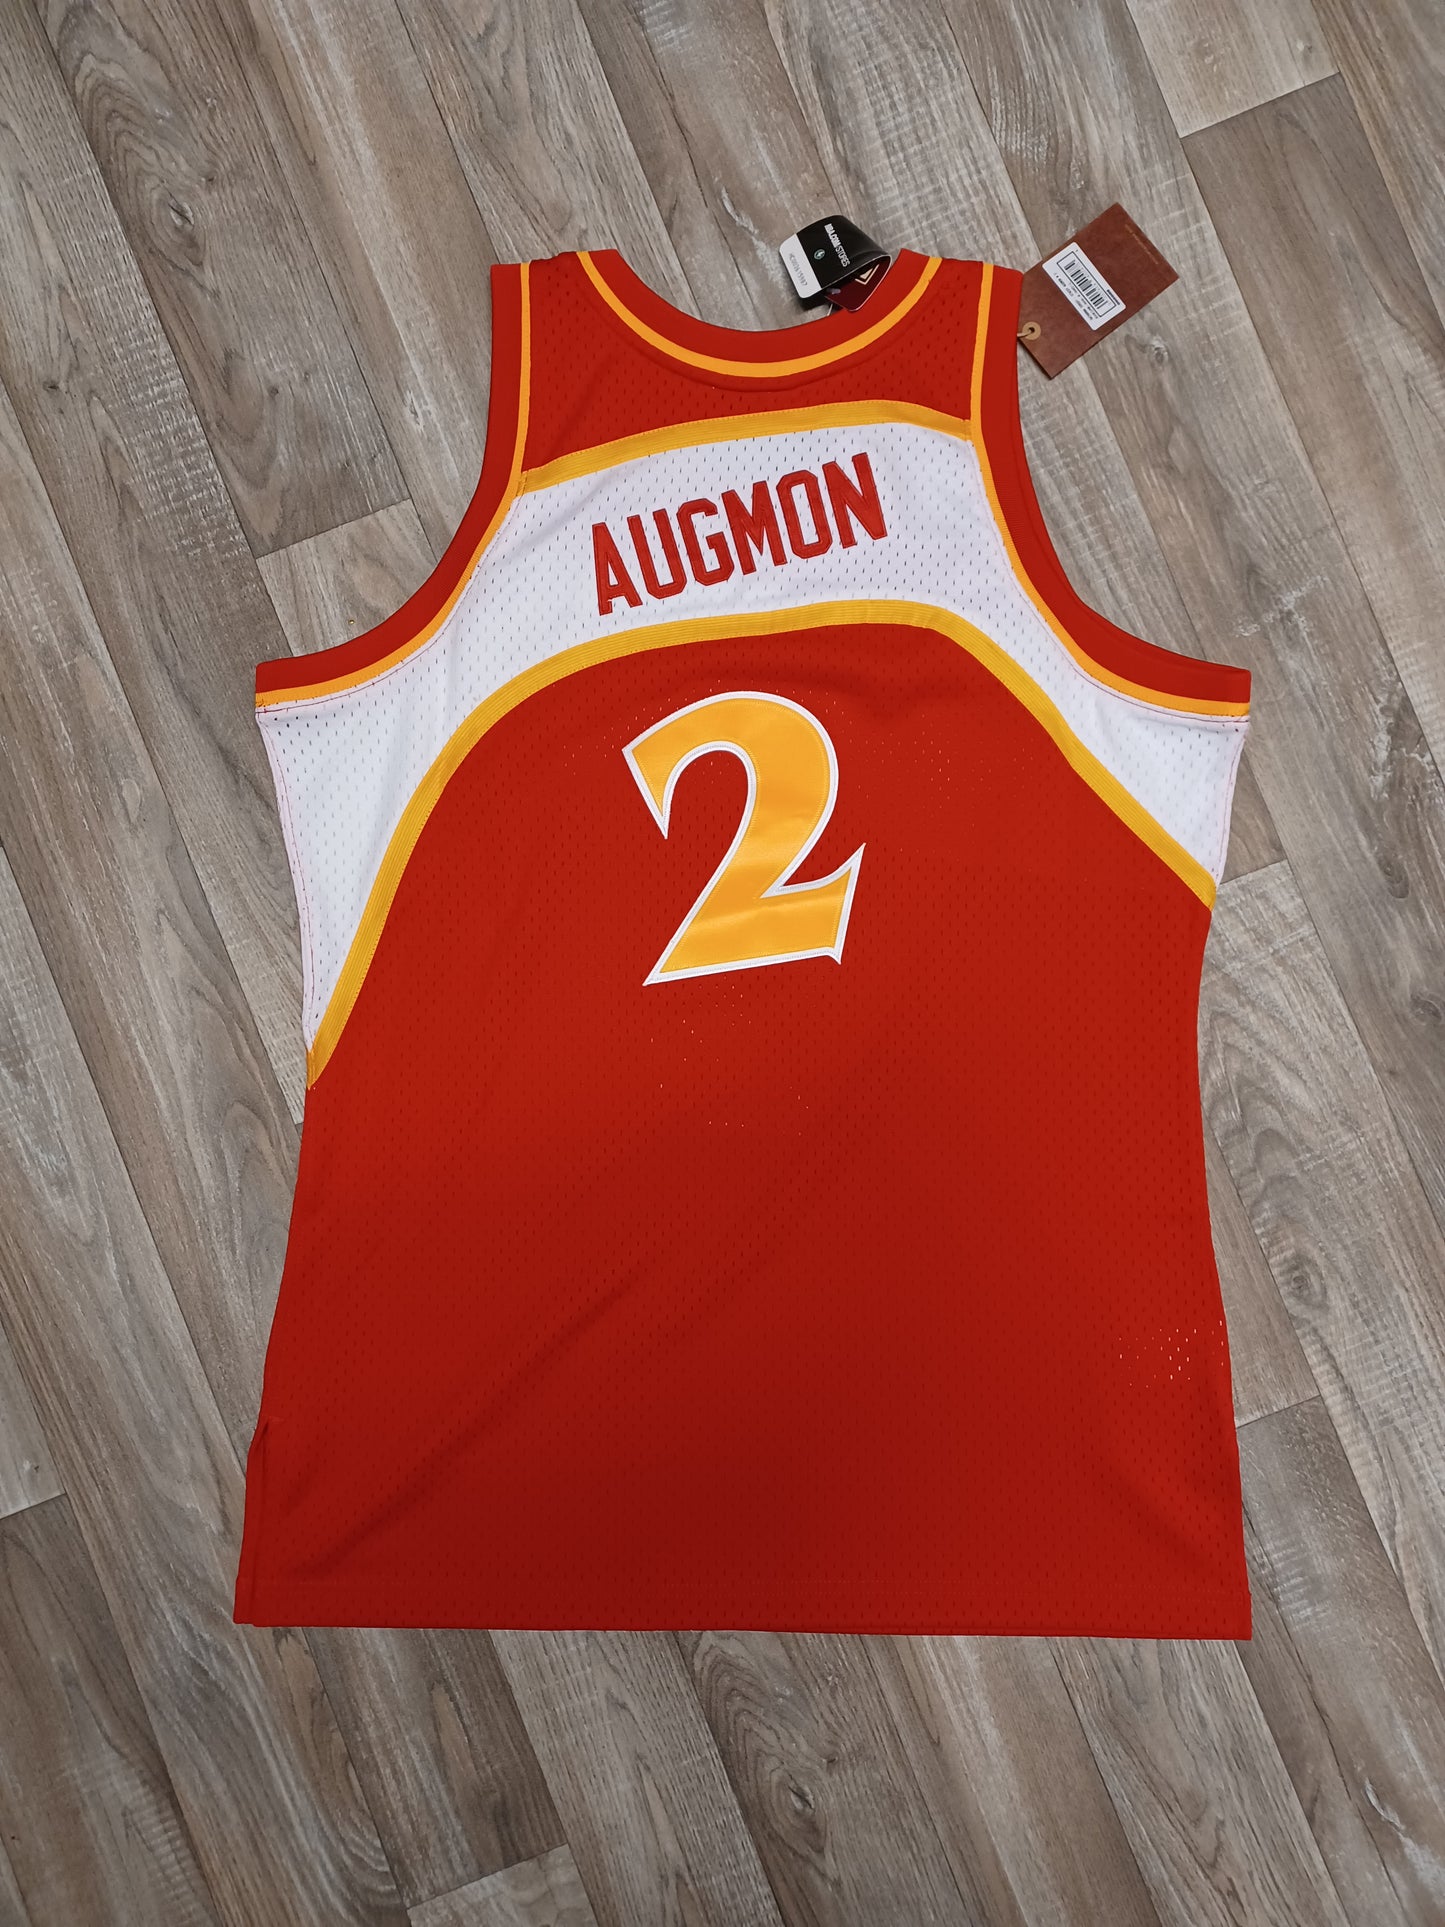 Stacey Augmon (first generation) Atlanta Hawks Jersey Size Large